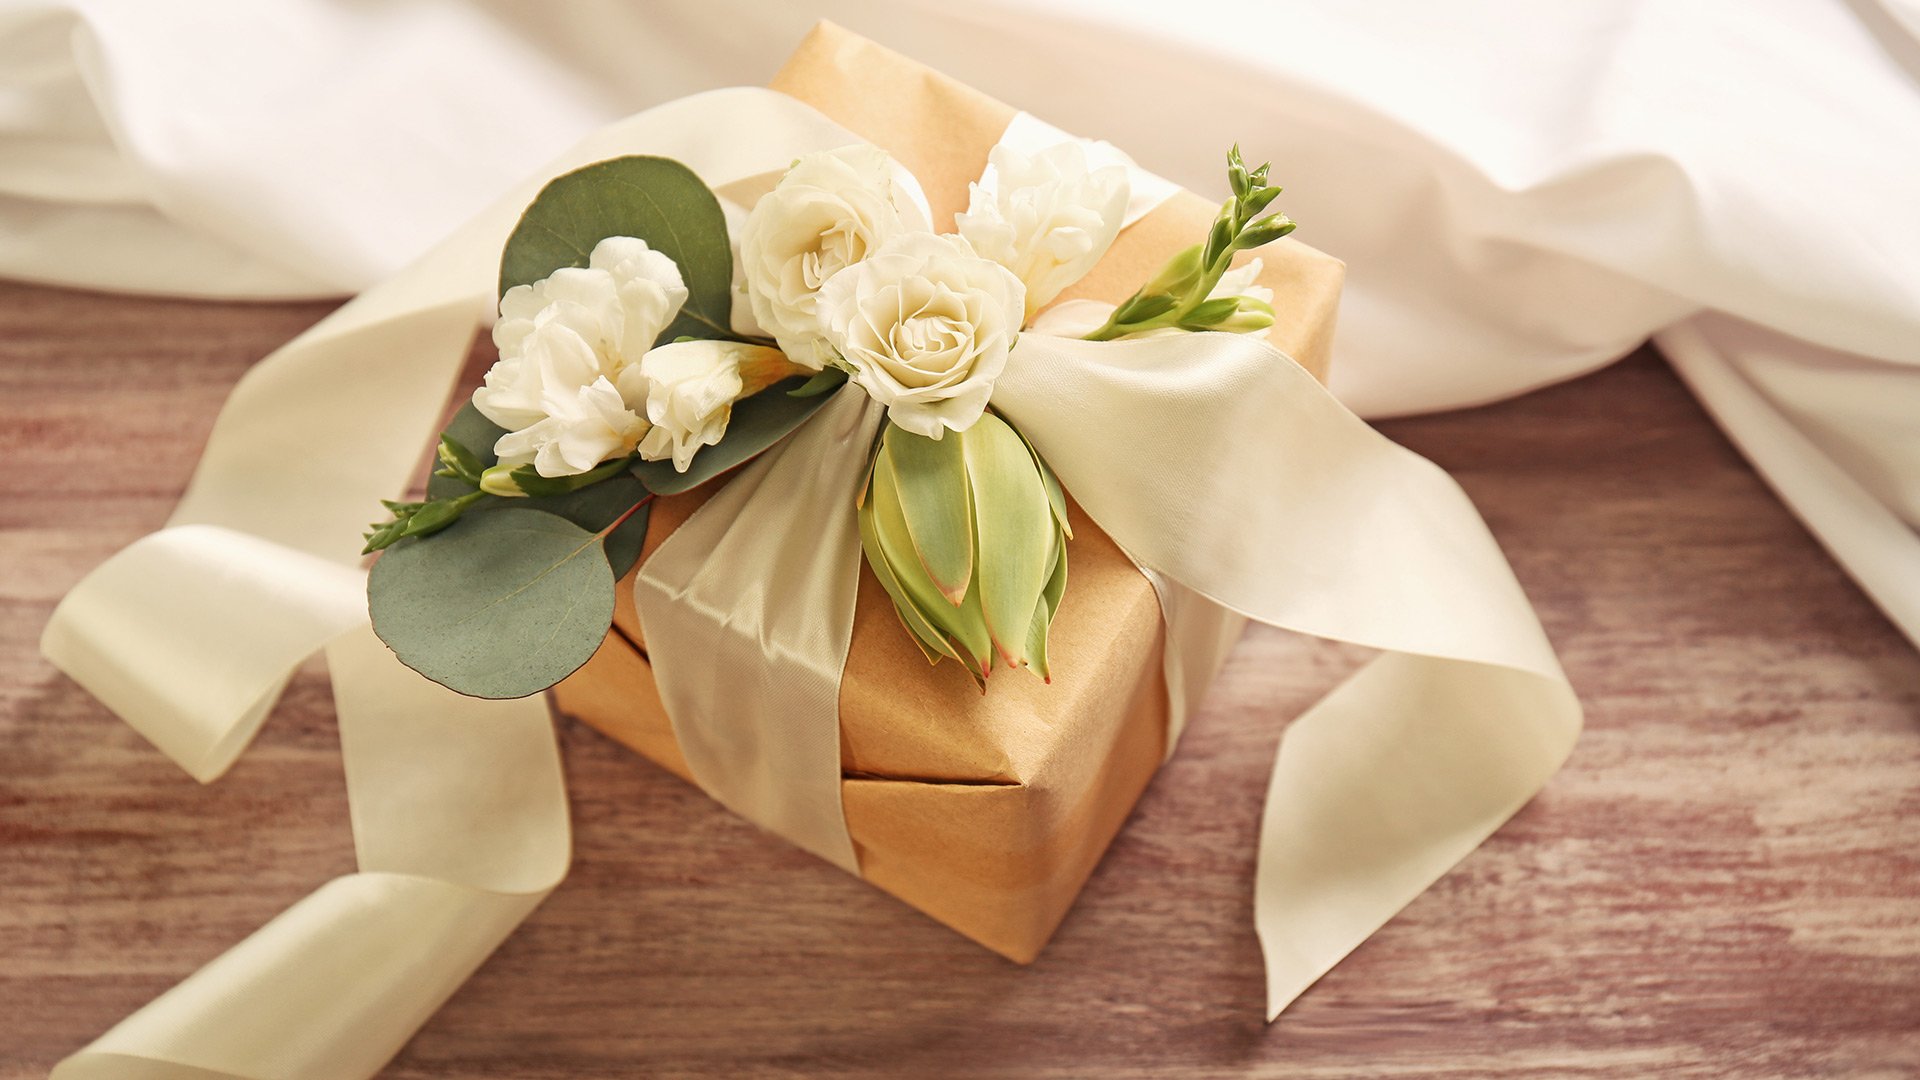 How to Choose the Perfect Wedding Gift For a Couple? Wedding Gift Ideas ...